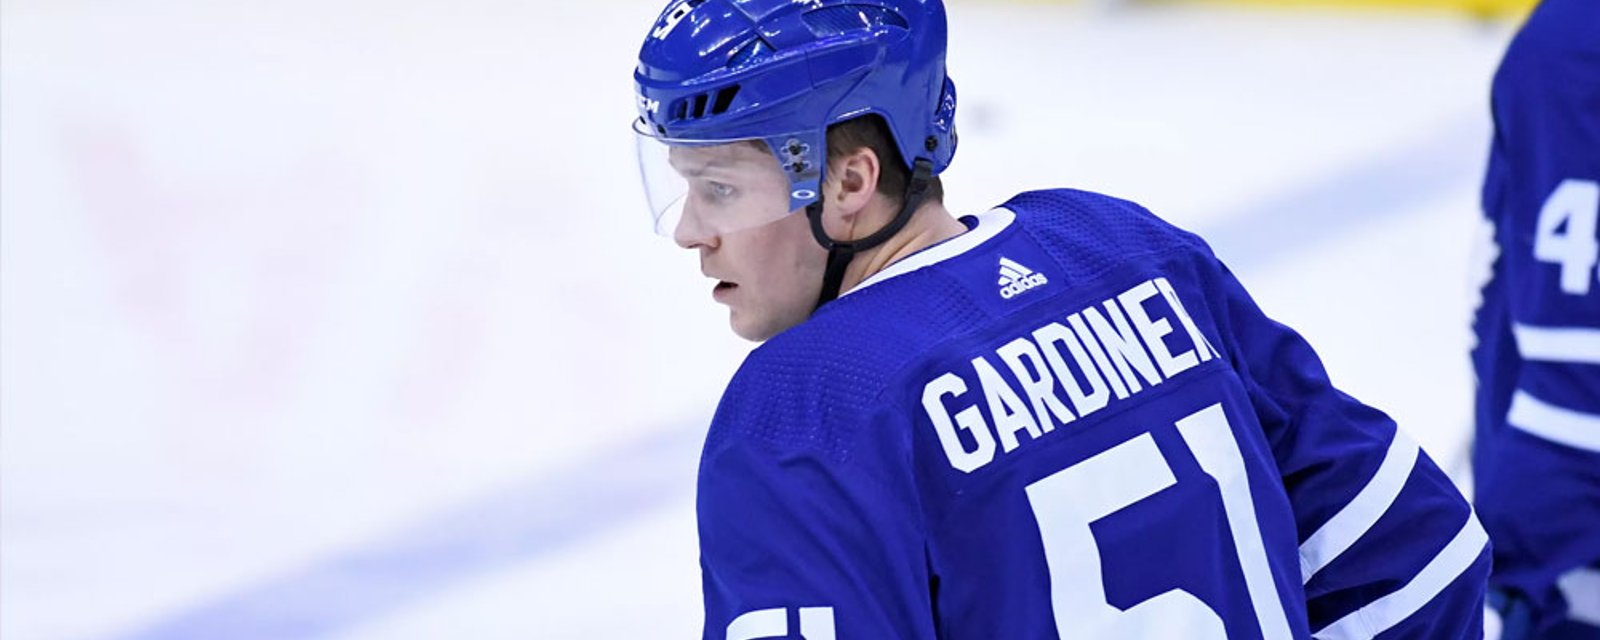 Report: Gardiner turned down $15 million offer from Canadian team in July